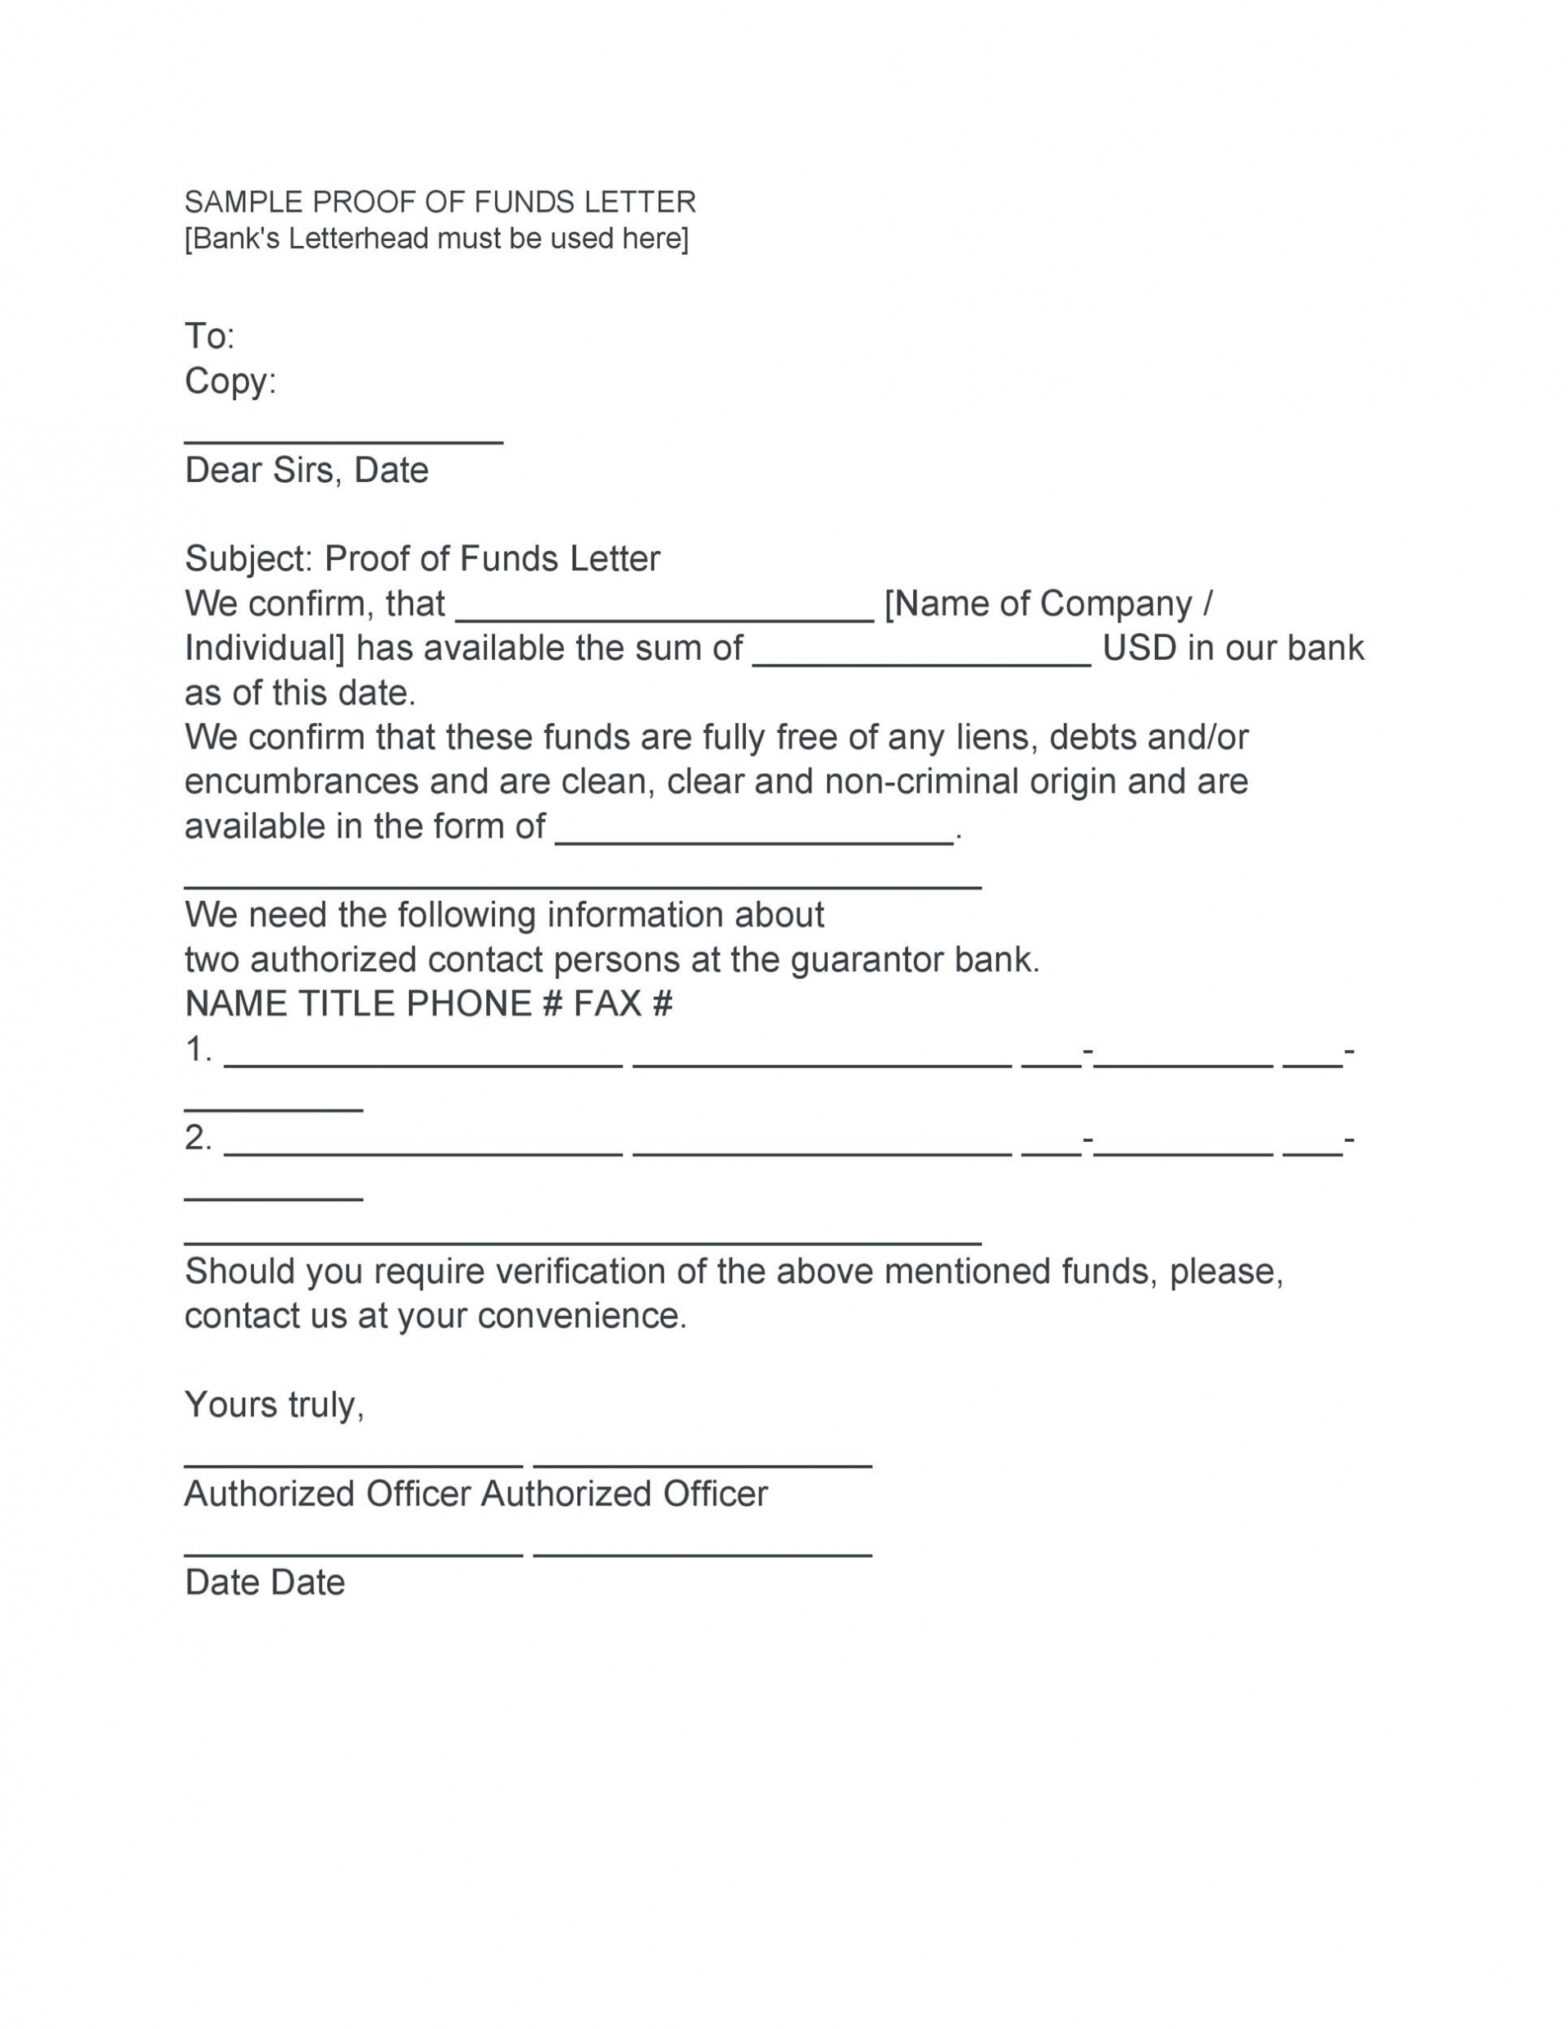 25 Best Proof Of Funds Letter Templates ᐅ Templatelab with Proof Of Funds Letter Template